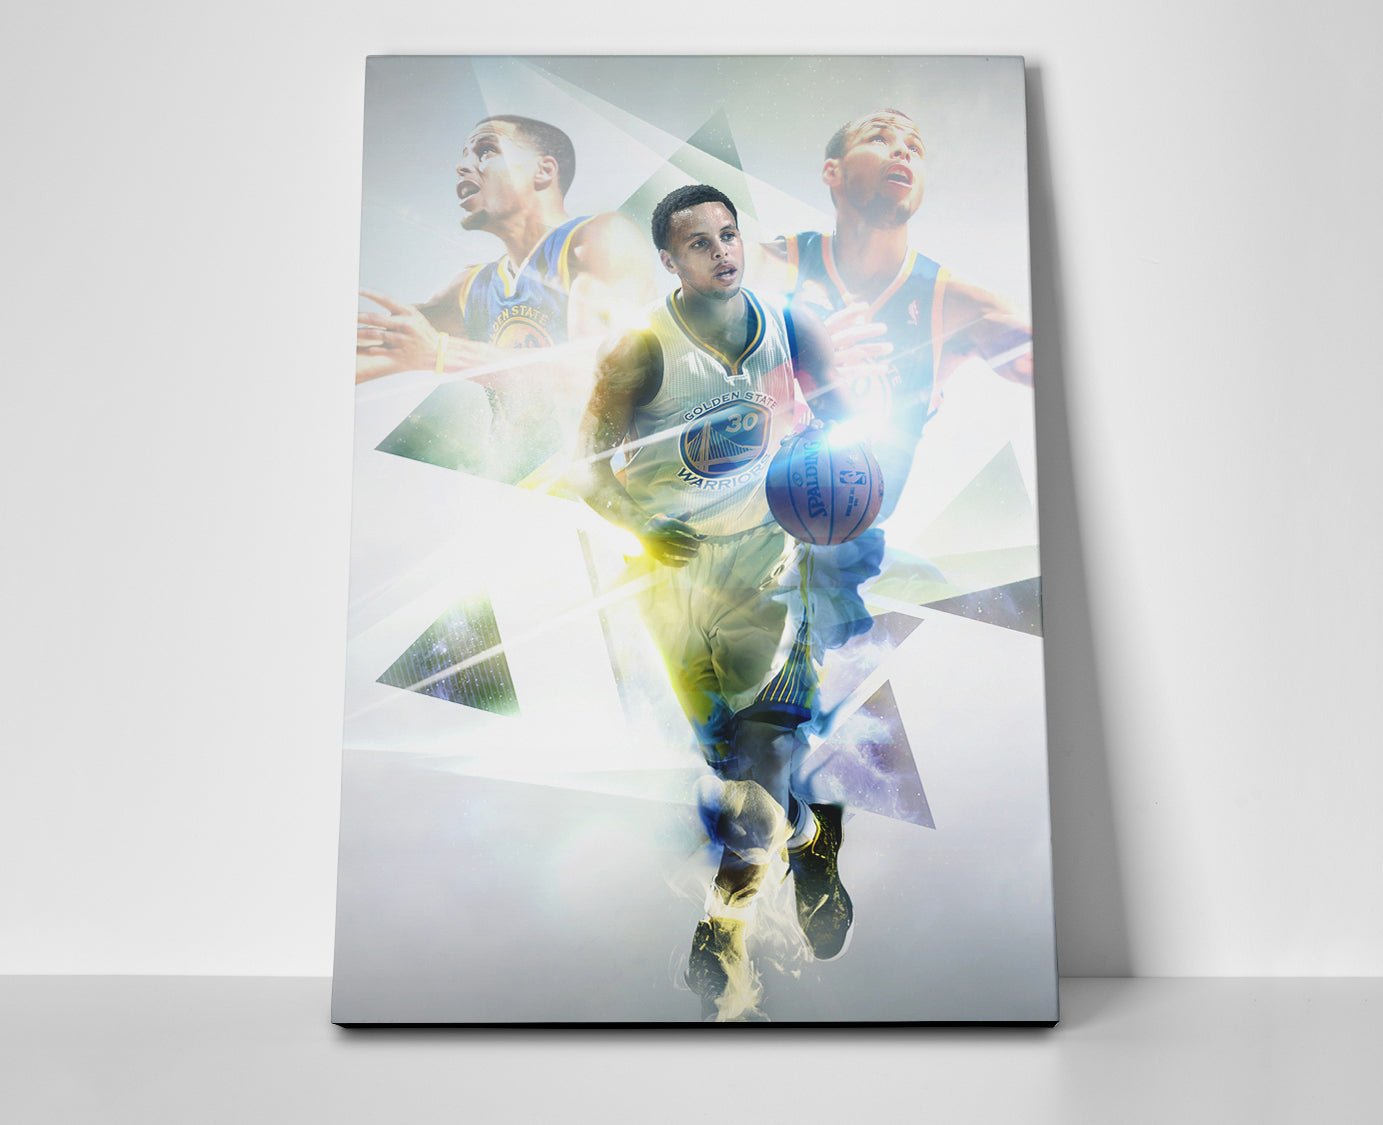 Steph Curry Dribble Poster canvas stephen